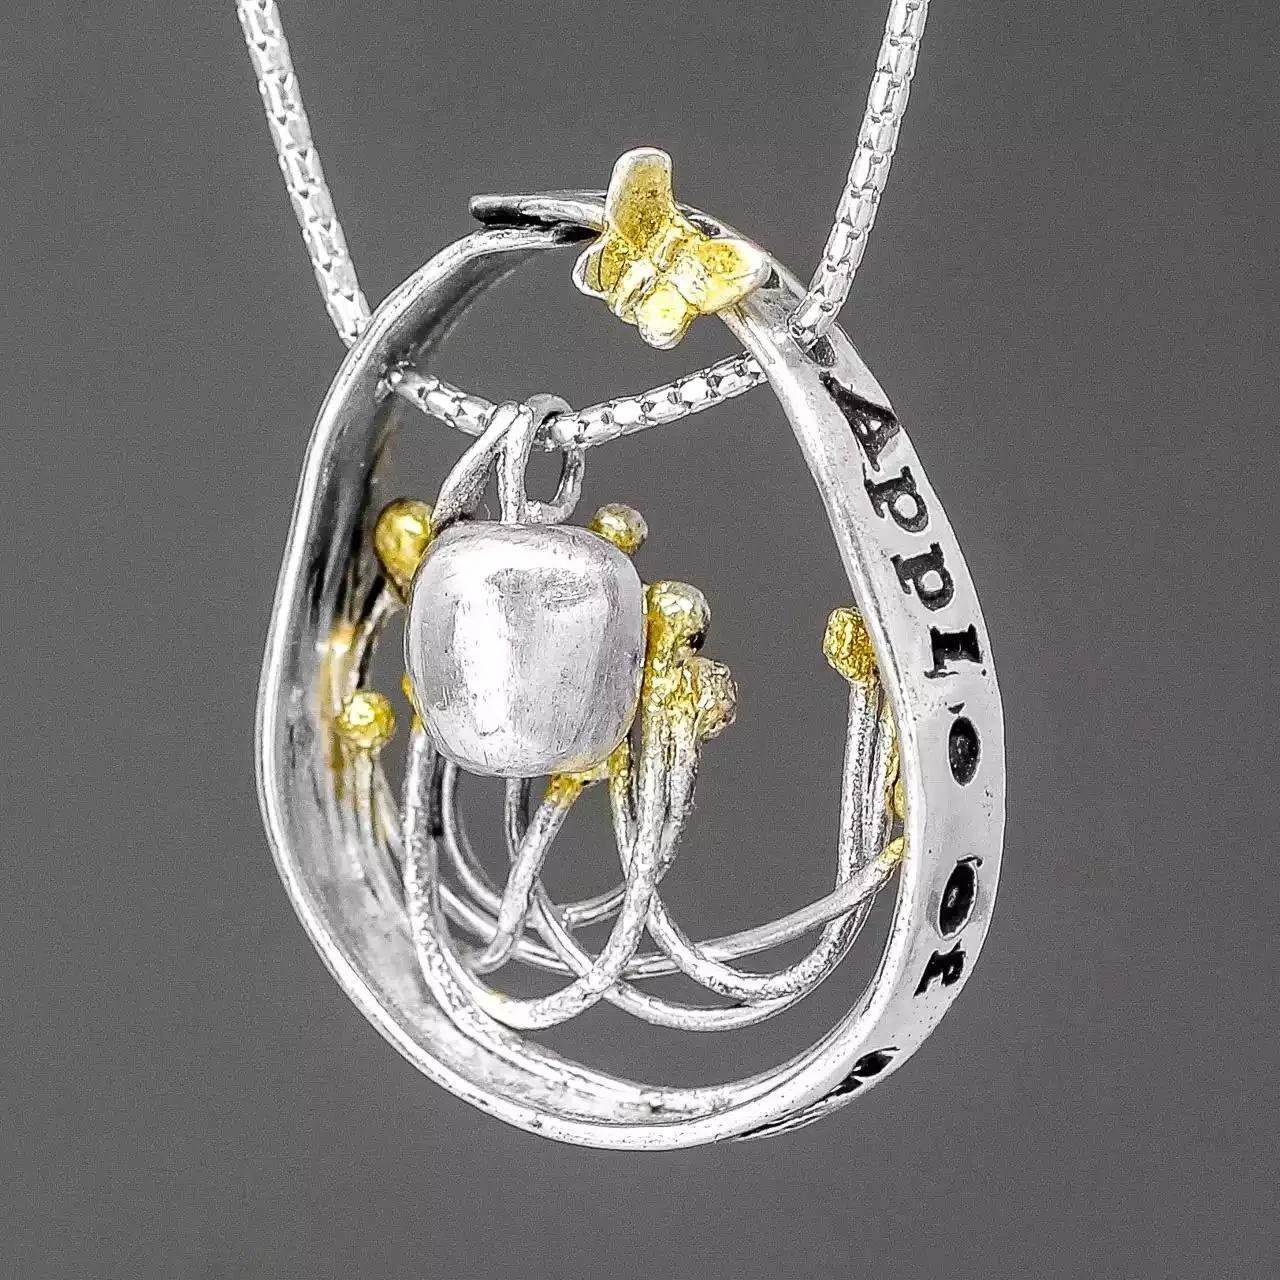 Apple Of My Eye Silver and Gold Plate Necklace by Xuella Arnold